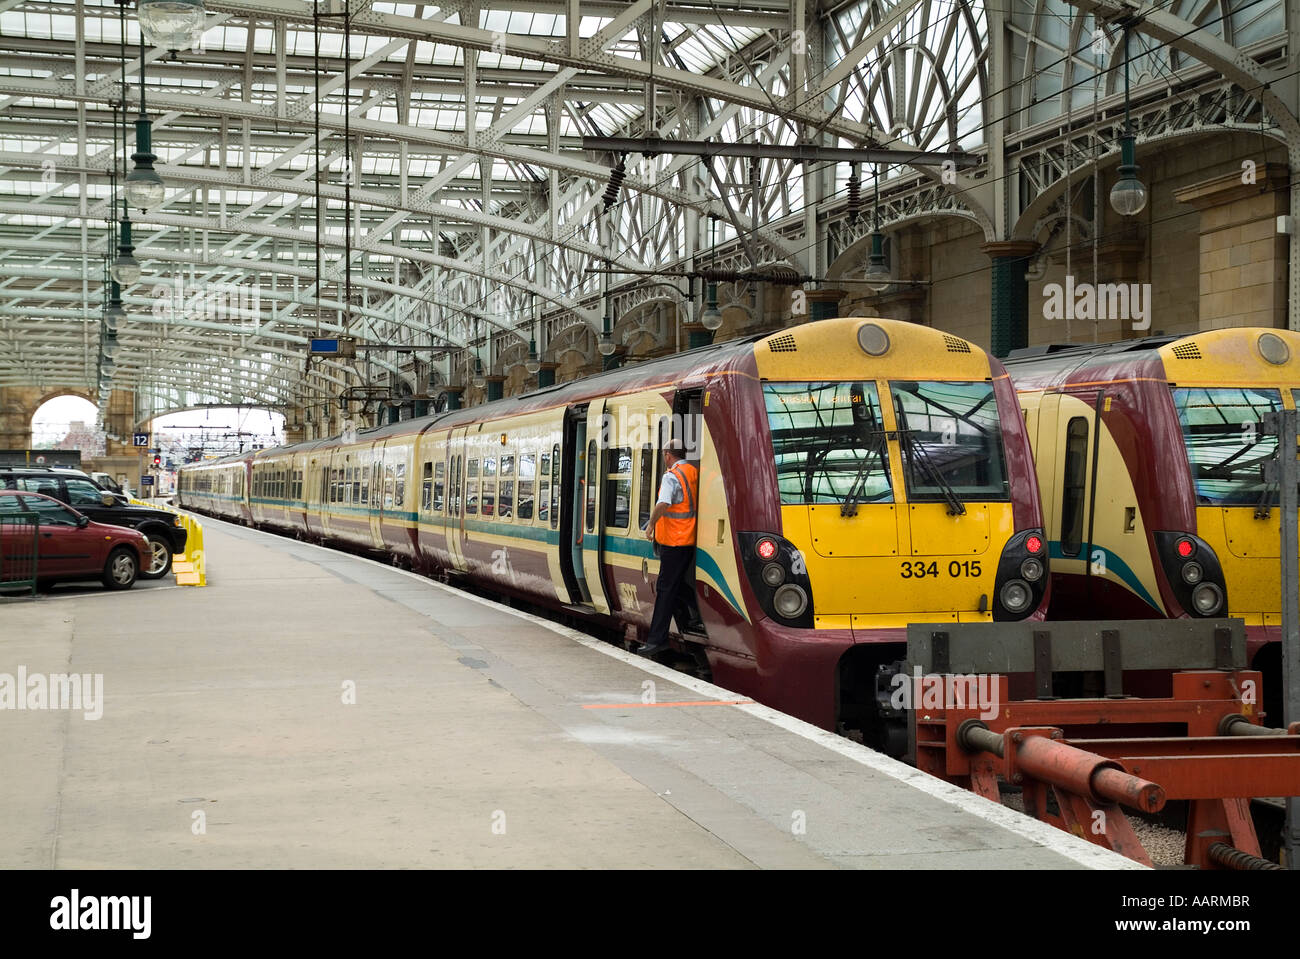 dh First scotrail class 334 CENTRAL STATION GLASGOW SPT Juniper trains and coaches stationary at platform passenger train Stock Photo